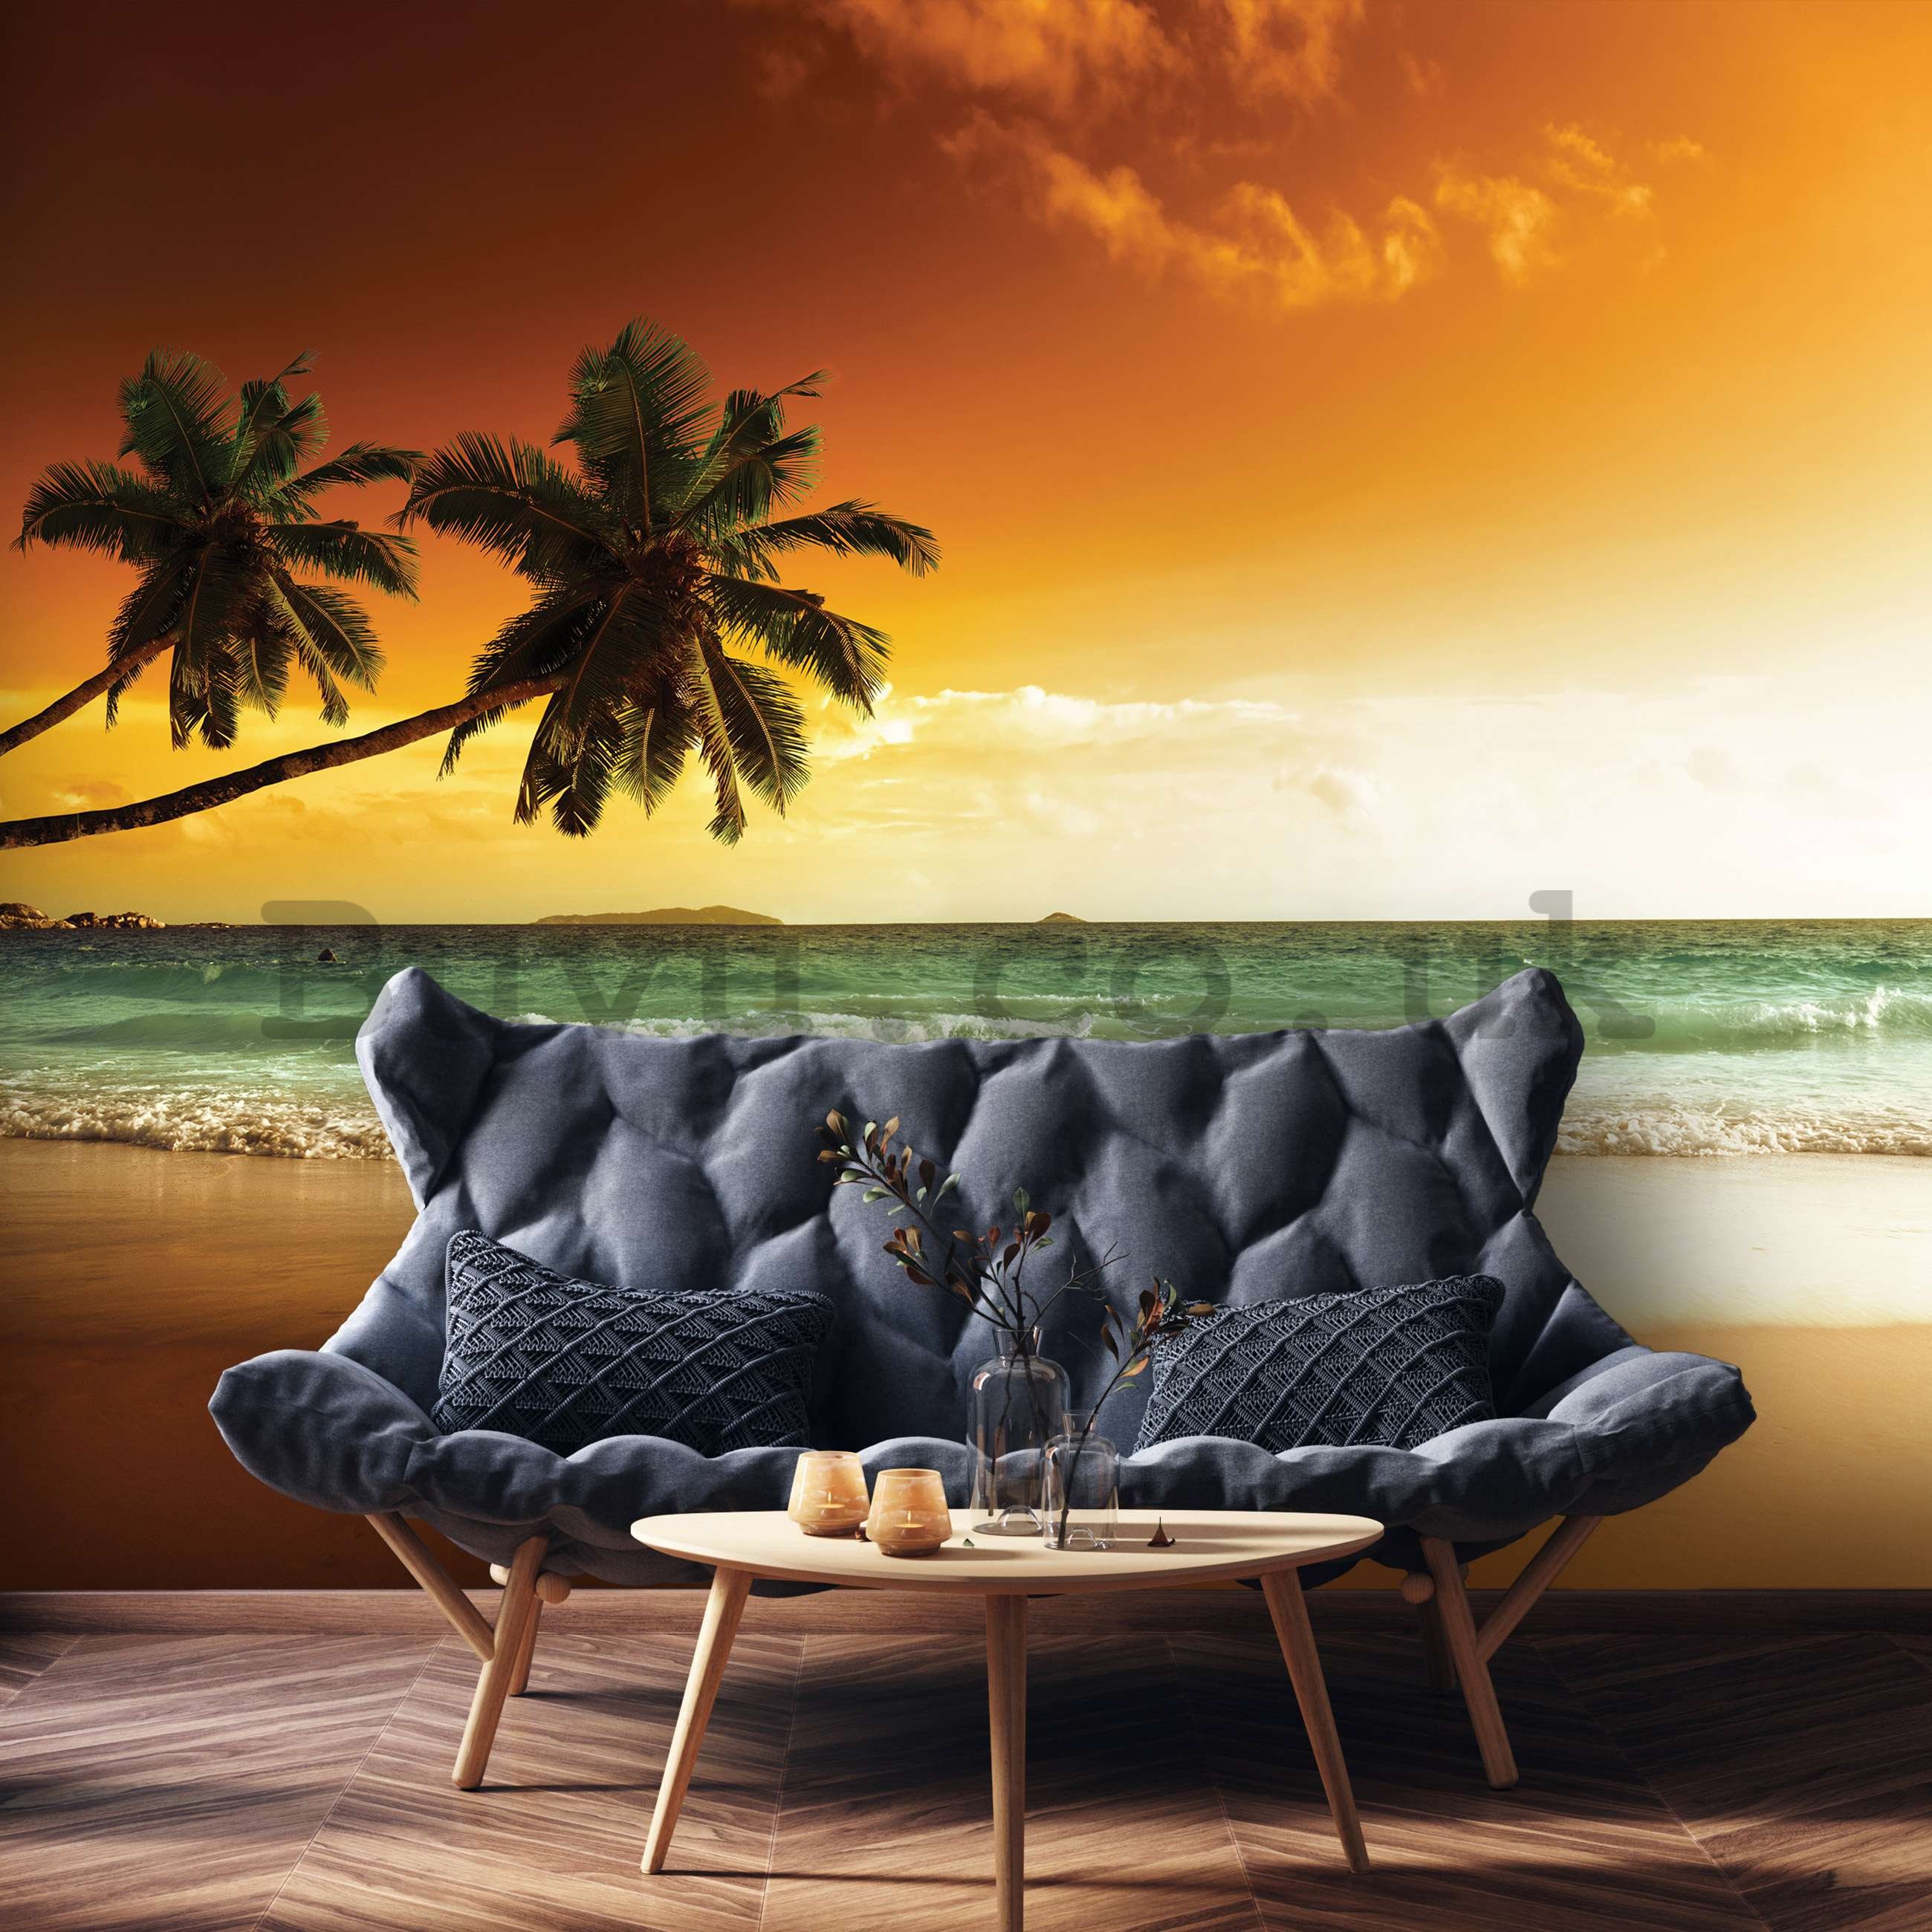 Wall mural vlies: Palm trees and beach at sunset - 416x254 cm